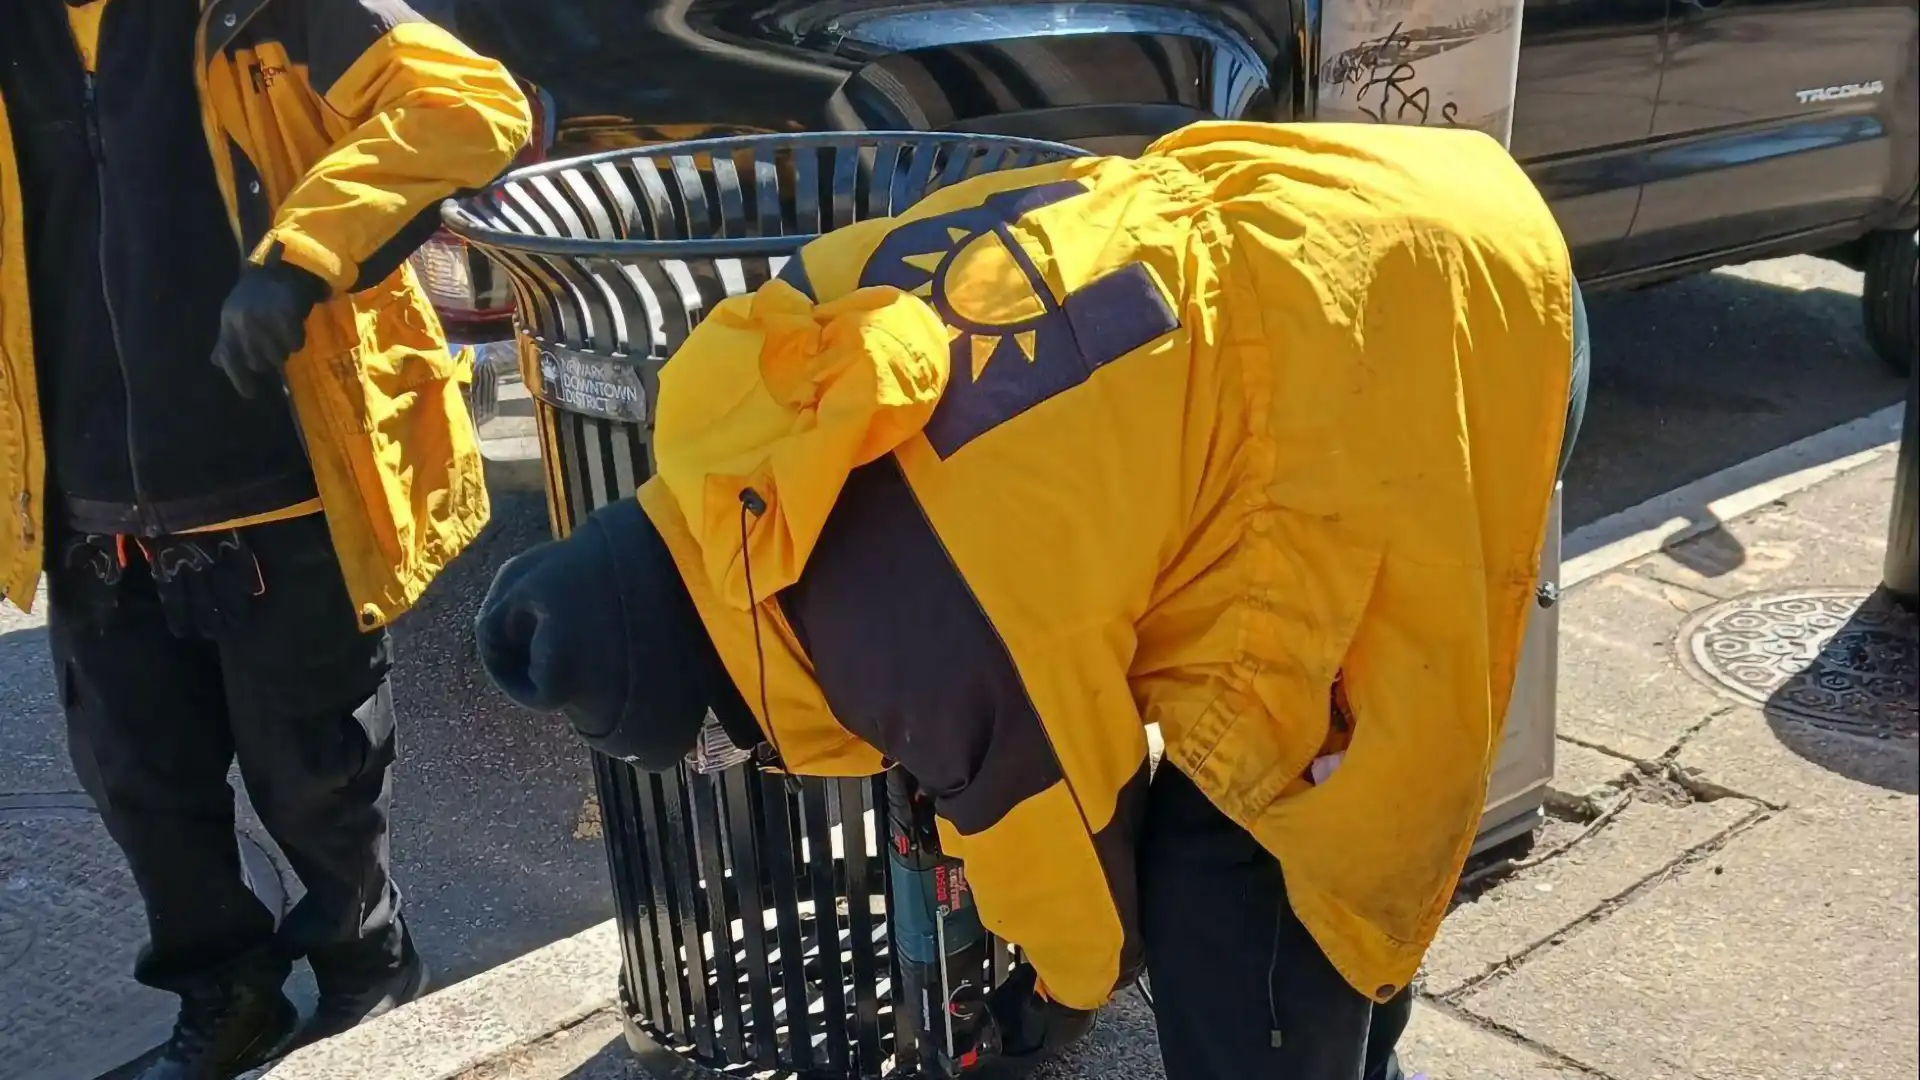 A maintenance crew repairing a garbage can.